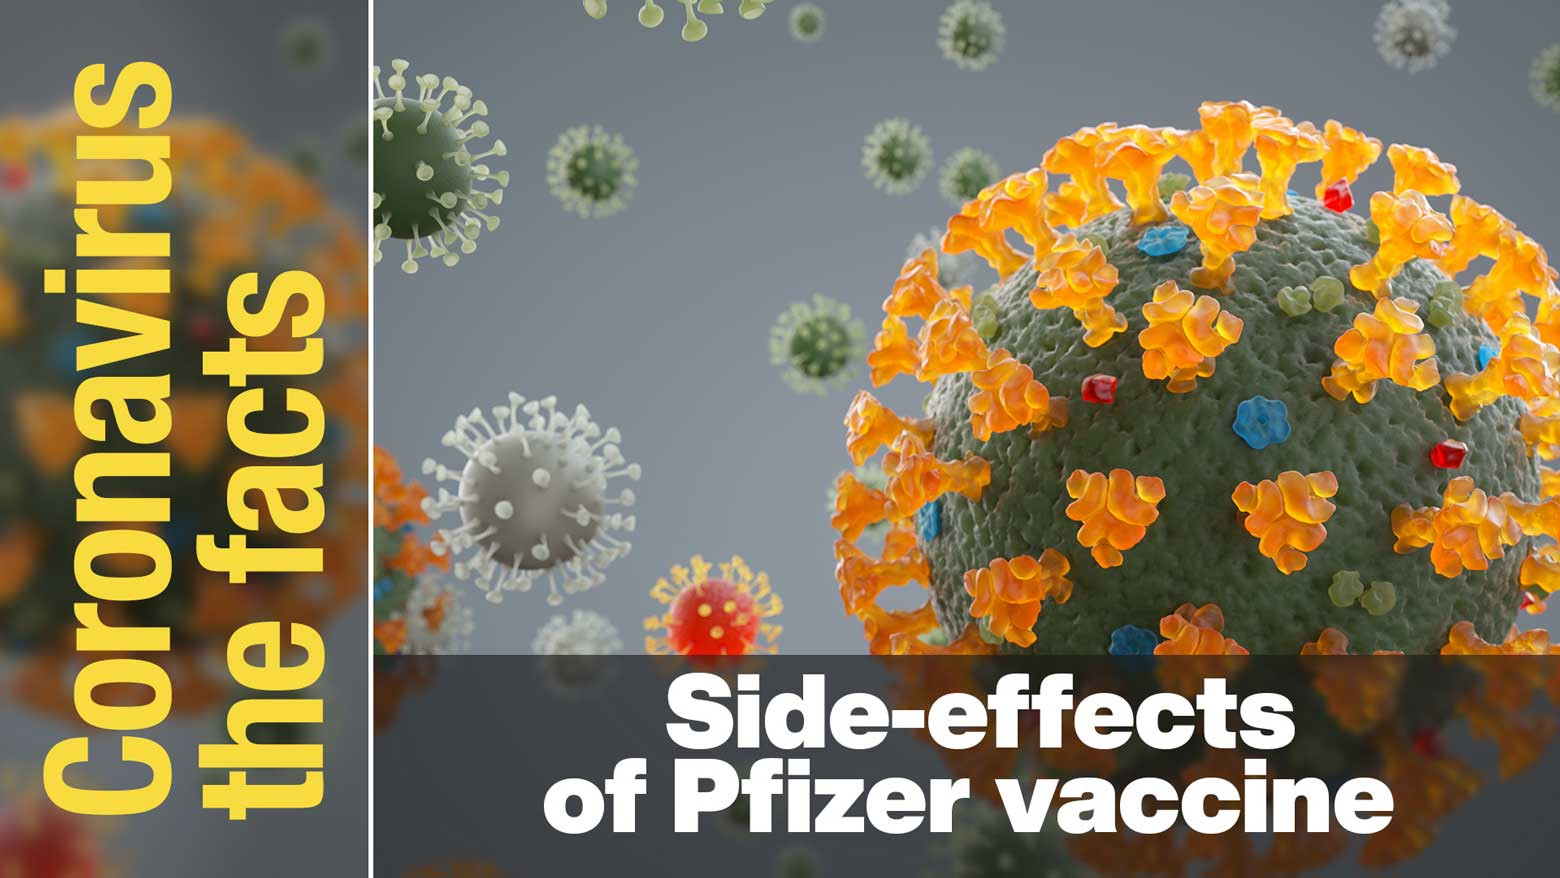 What are the side-effects of the Pfizer vaccine?